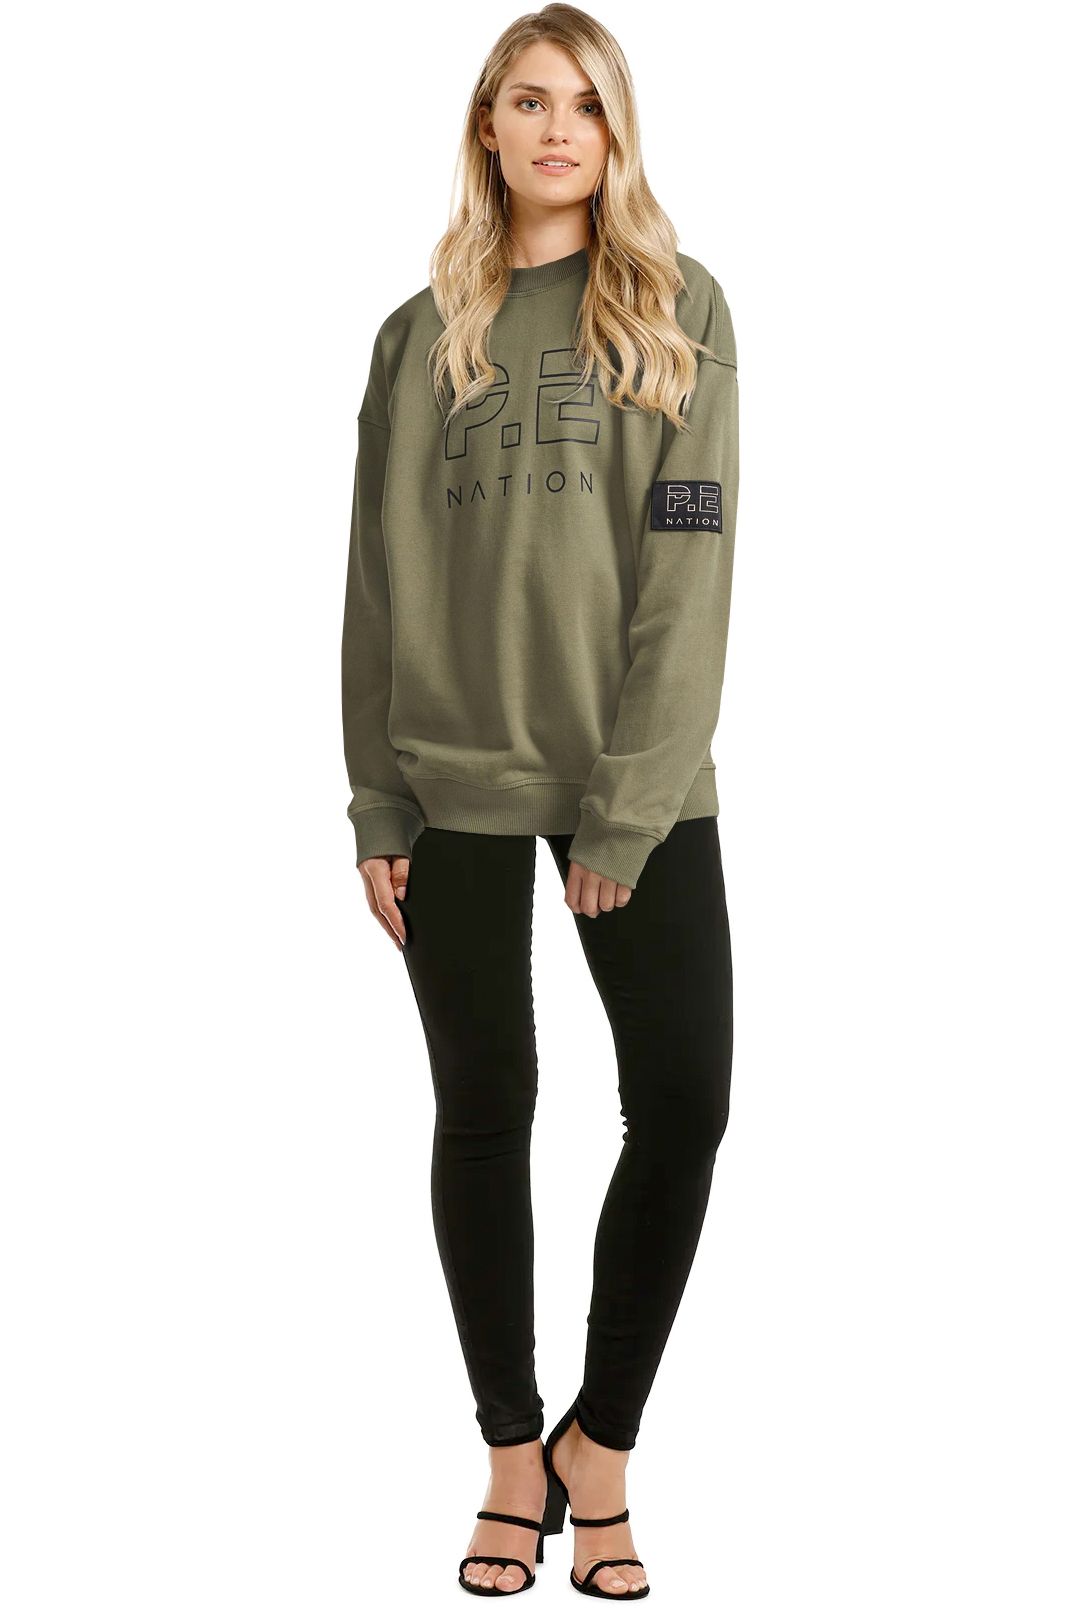 PE-Nation-Heads-Up-Sweat-Olive-Front